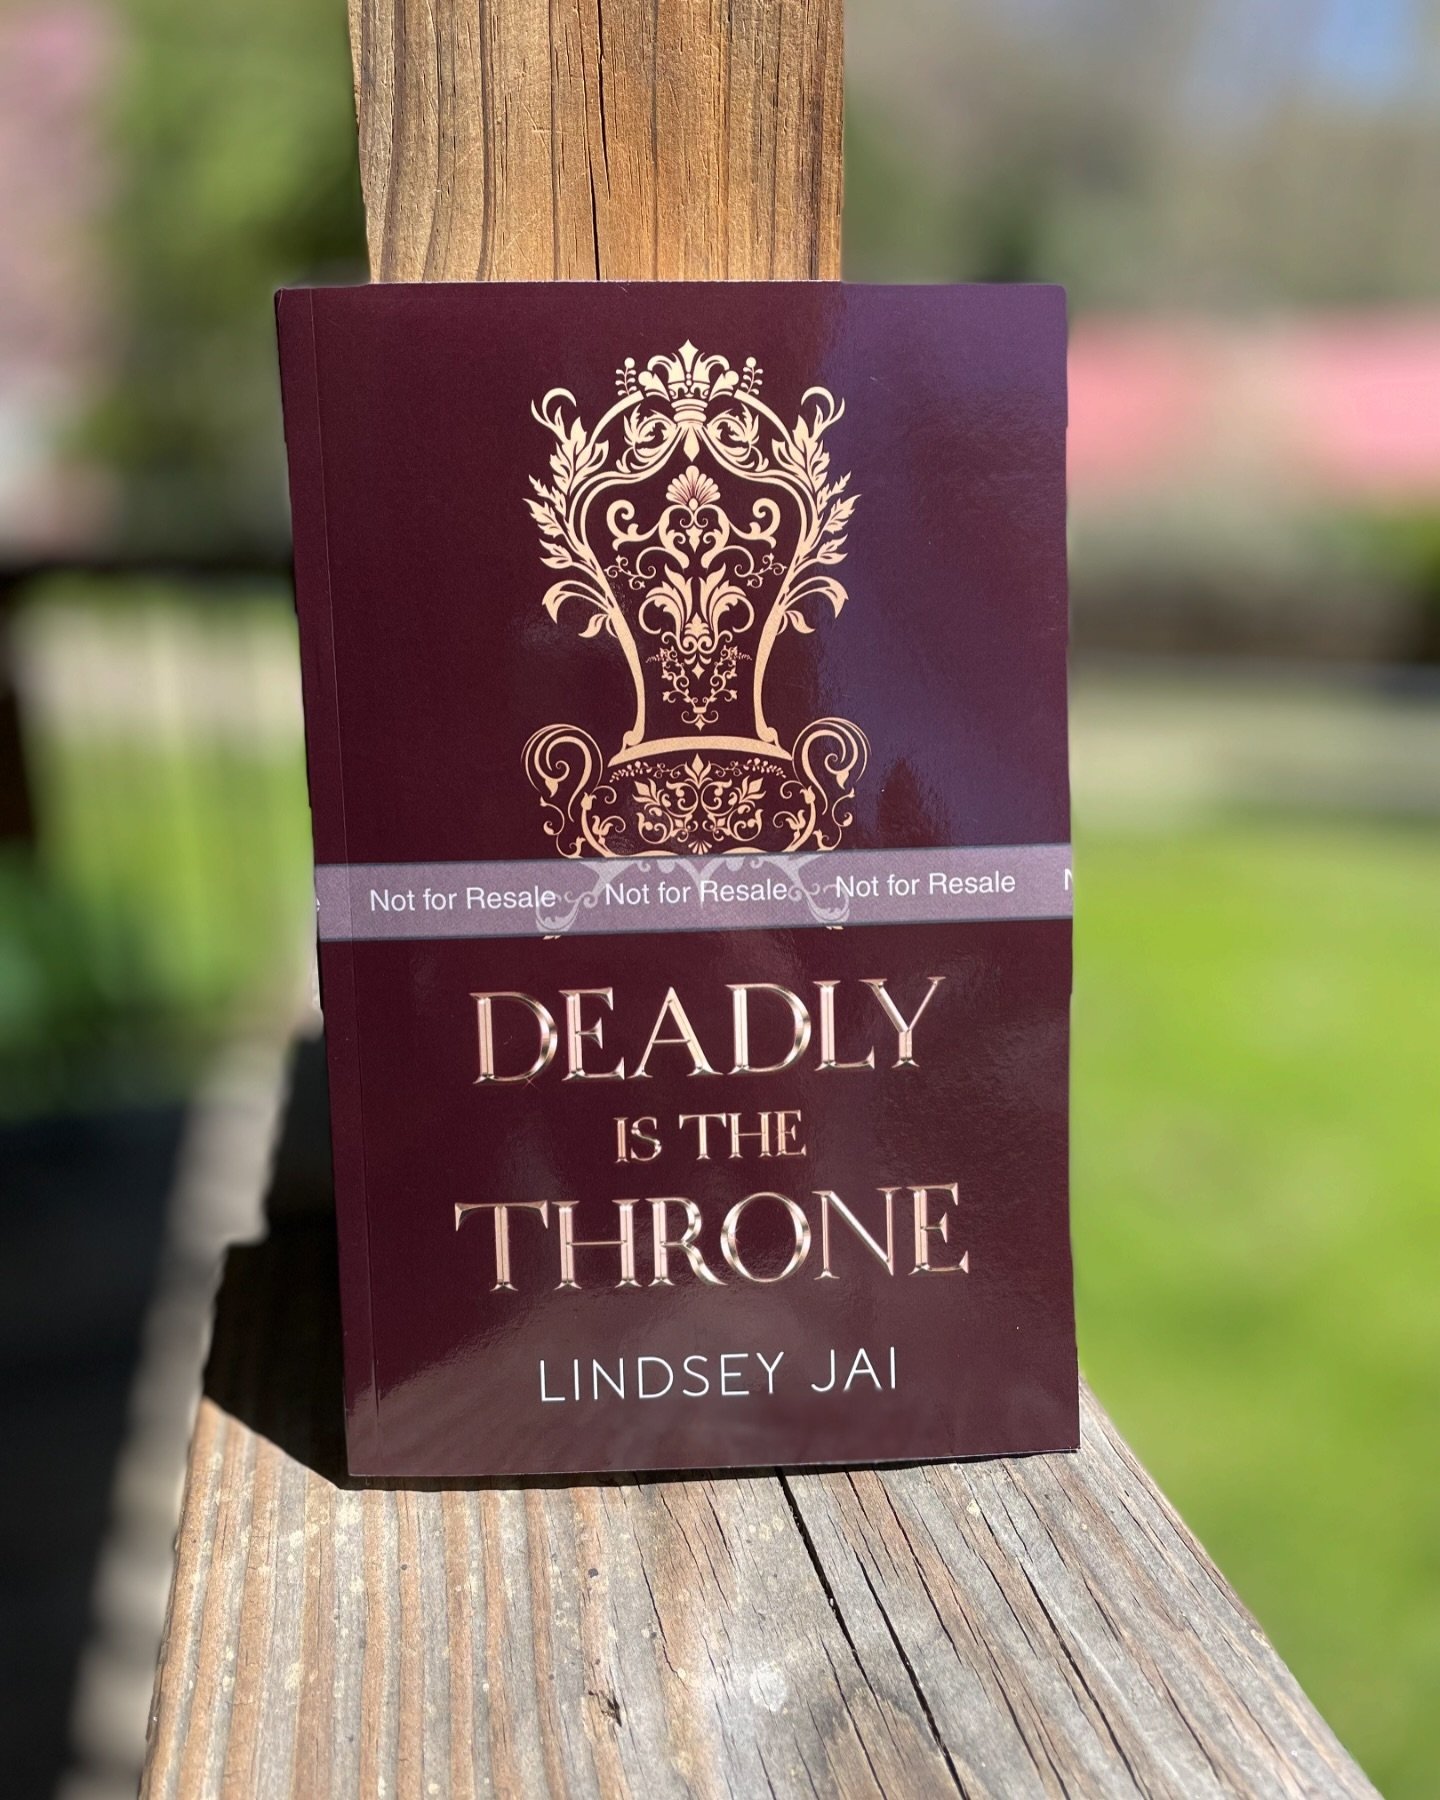 The Ebook (only) for Deadly is the Throne is now available for preorder ✨ book releasing May 30th!